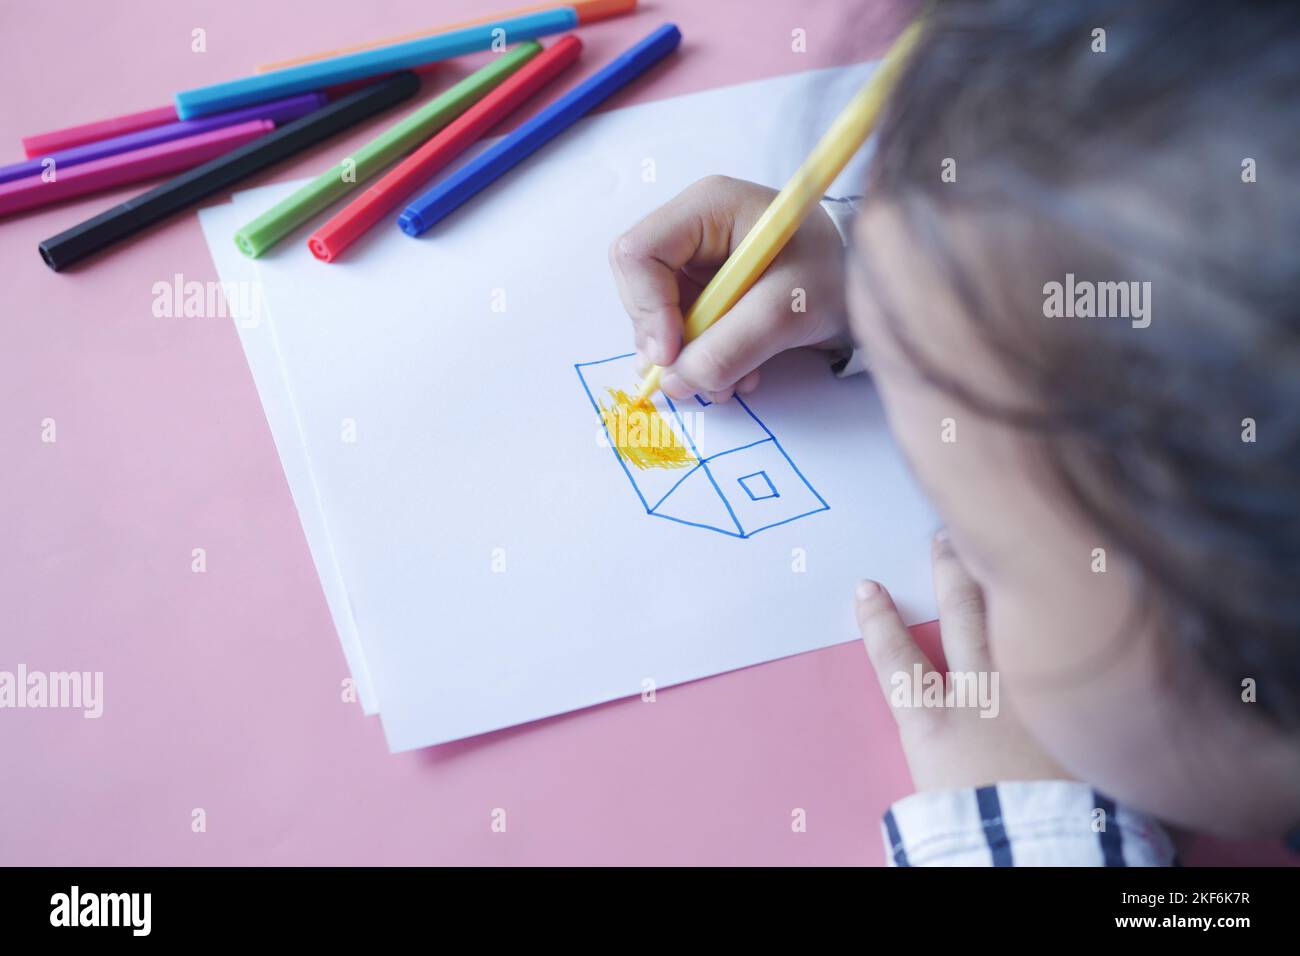 Close up of a child hand drawing with colored pencil on a page. Stock Photo